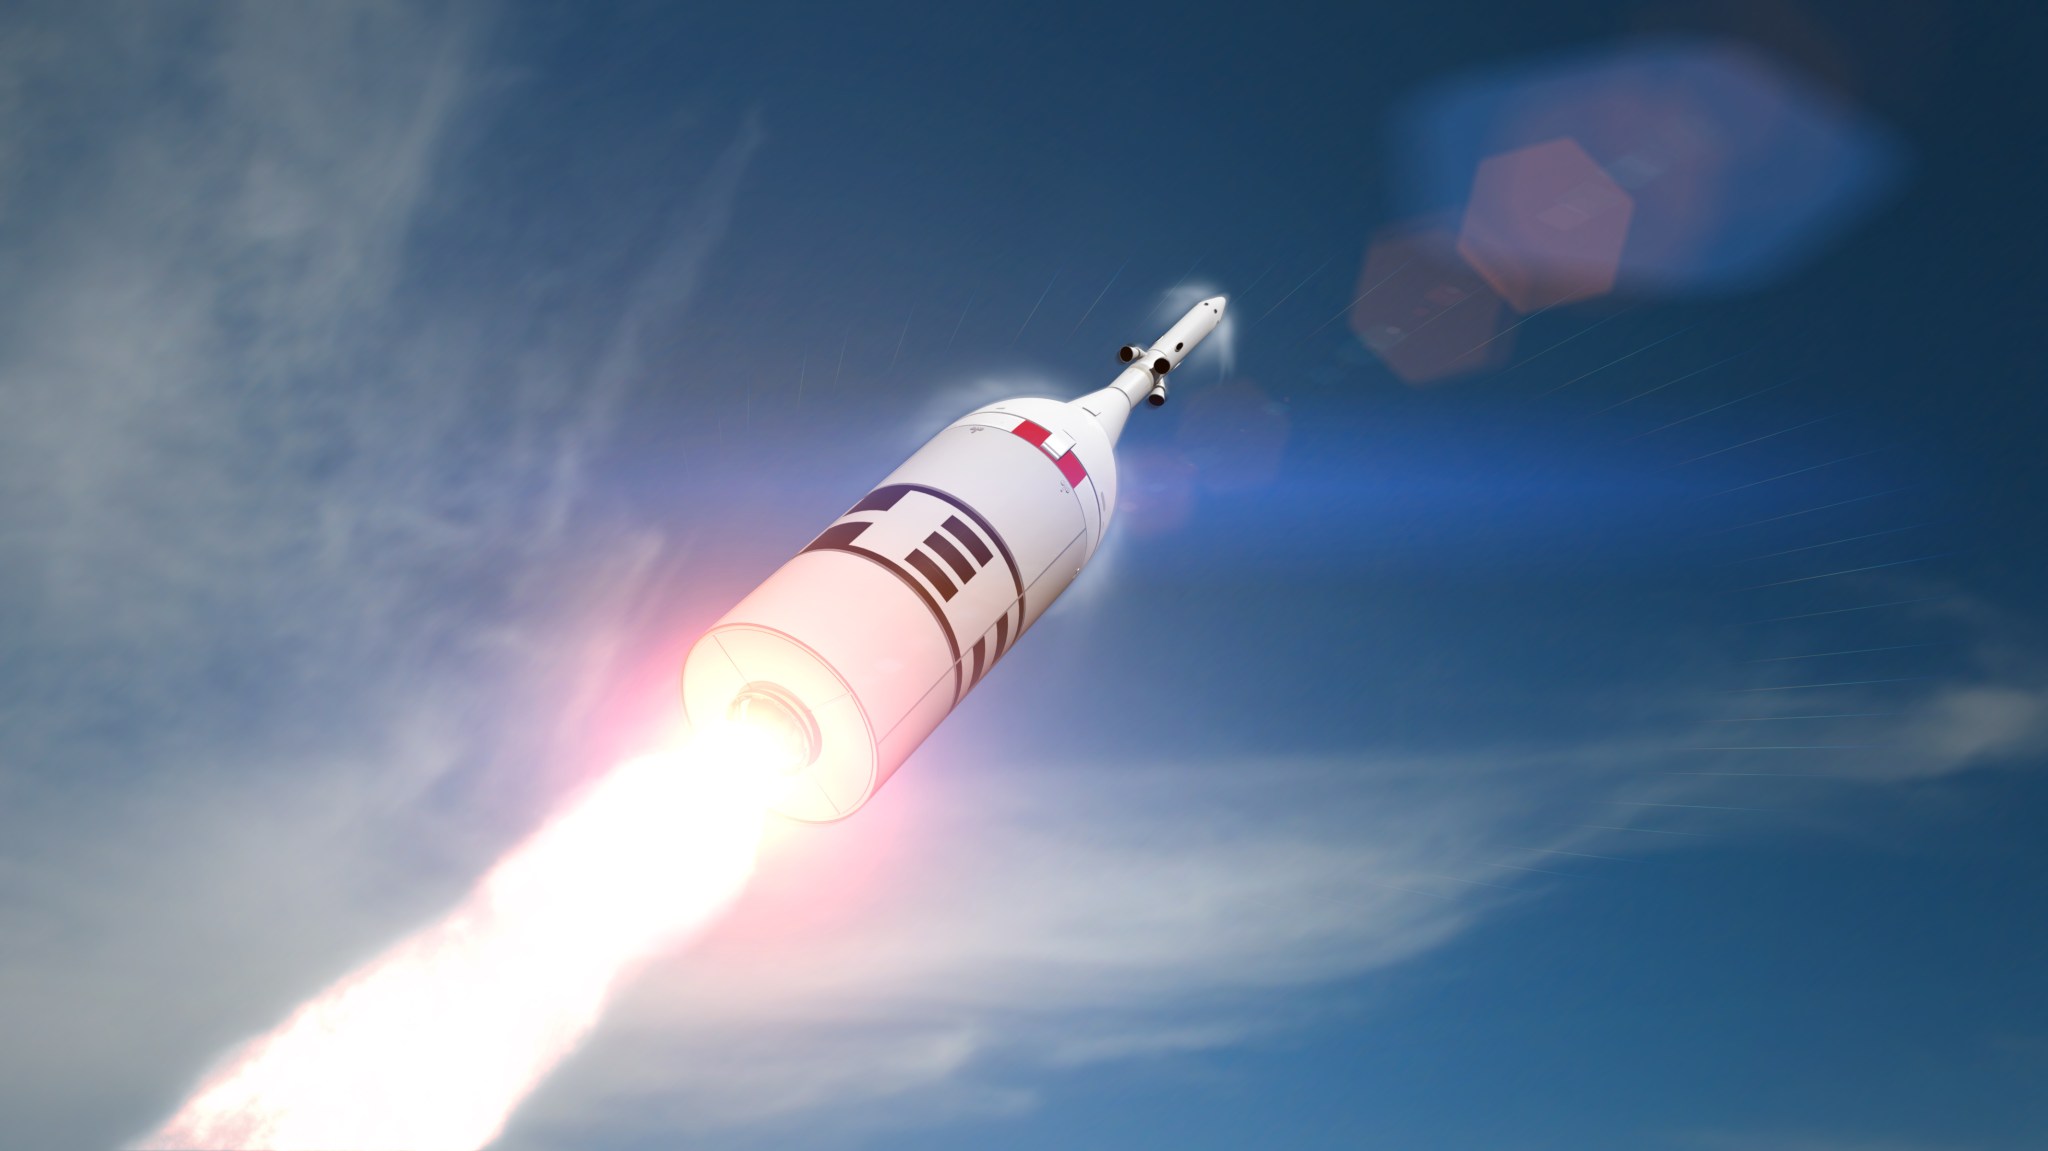 NASA will test Orion’s launch abort system in high-stress ascent conditions during an April 2019 test called Ascent Abort-2. 